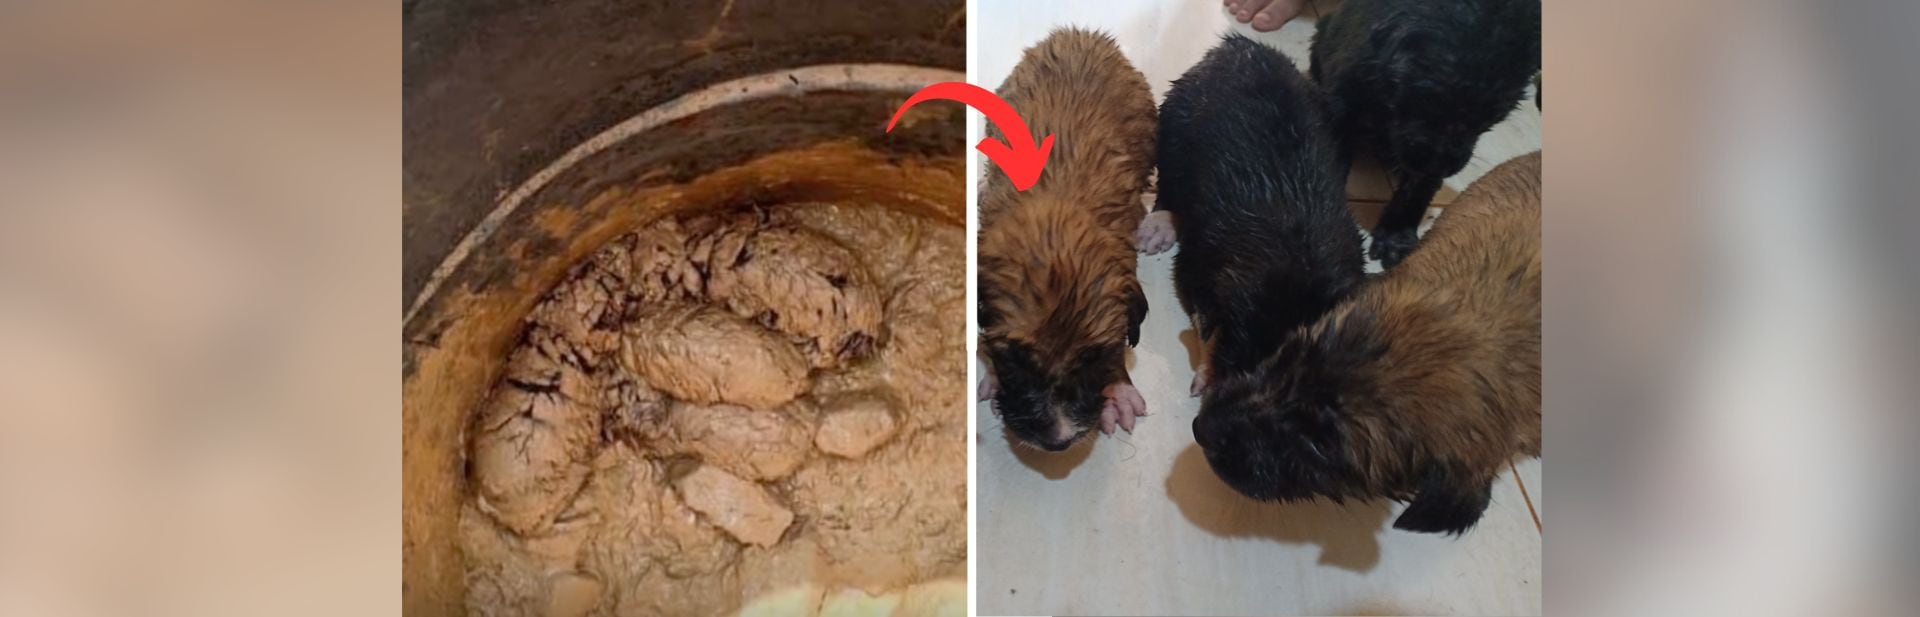 Man Mistakes “Mud Balls” for Rocks, Ends Up Rescuing Five Fluffy Puppies